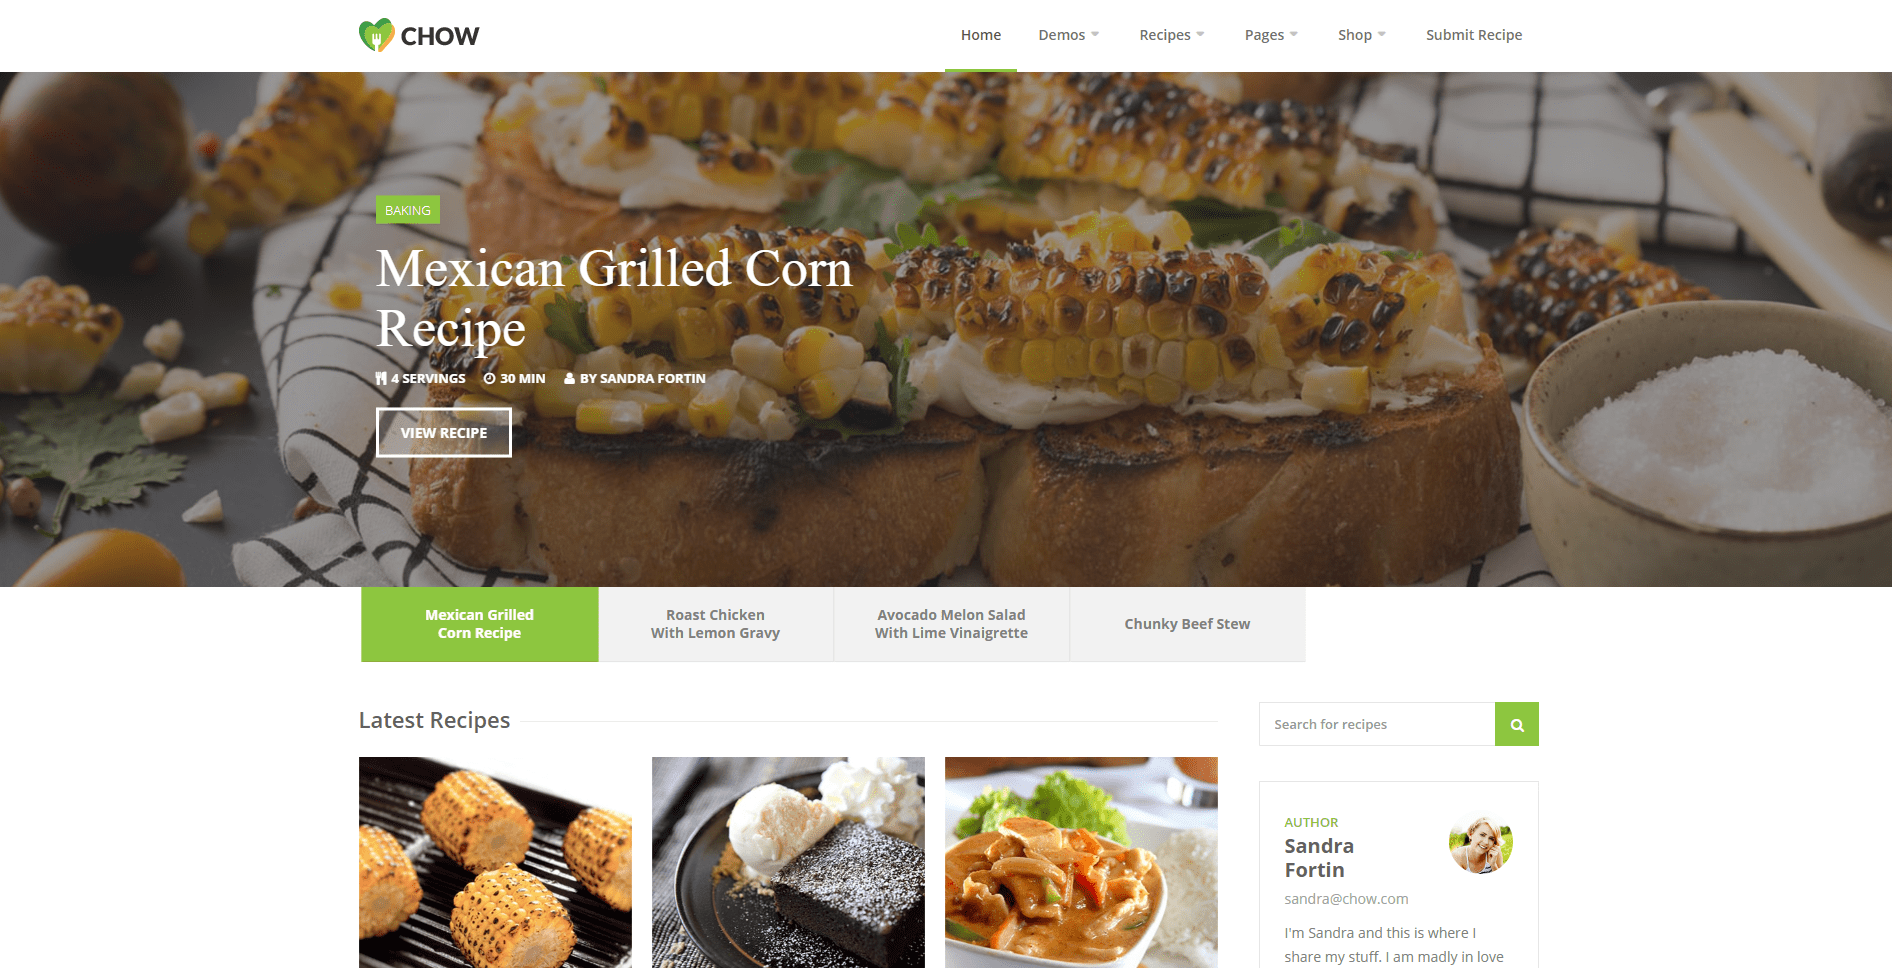 Chow - Recipes & Food Blog HTML Template